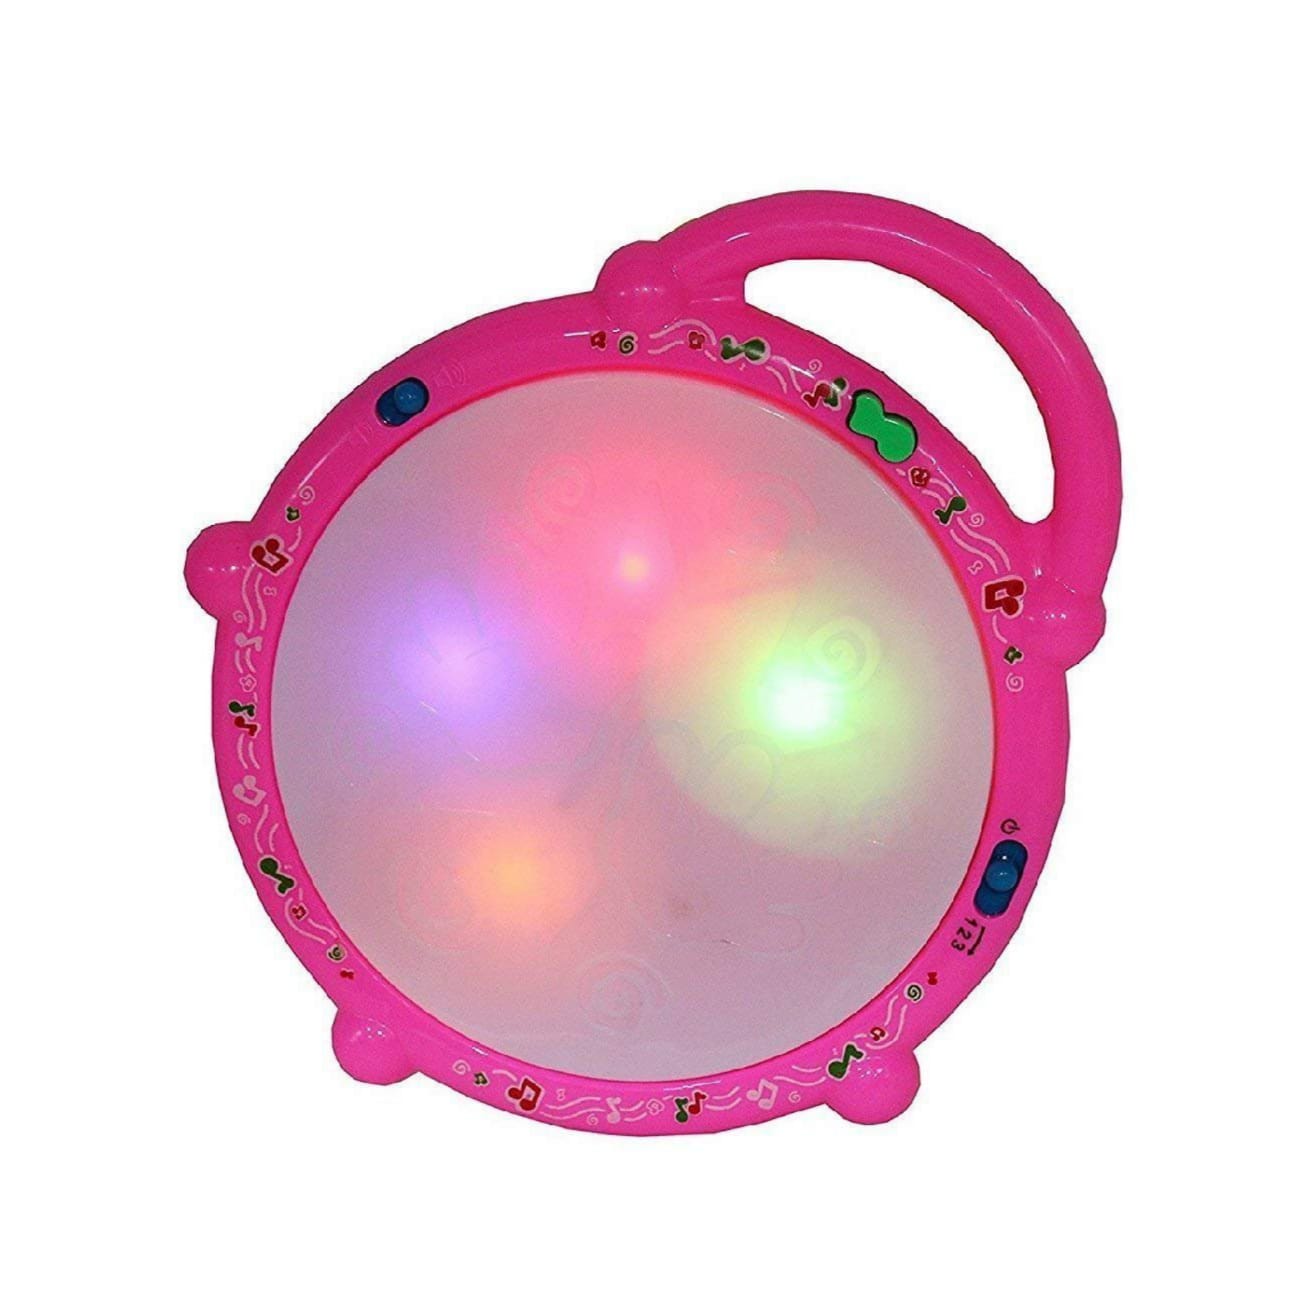 Multicolored Flash Drum With Sound and Light